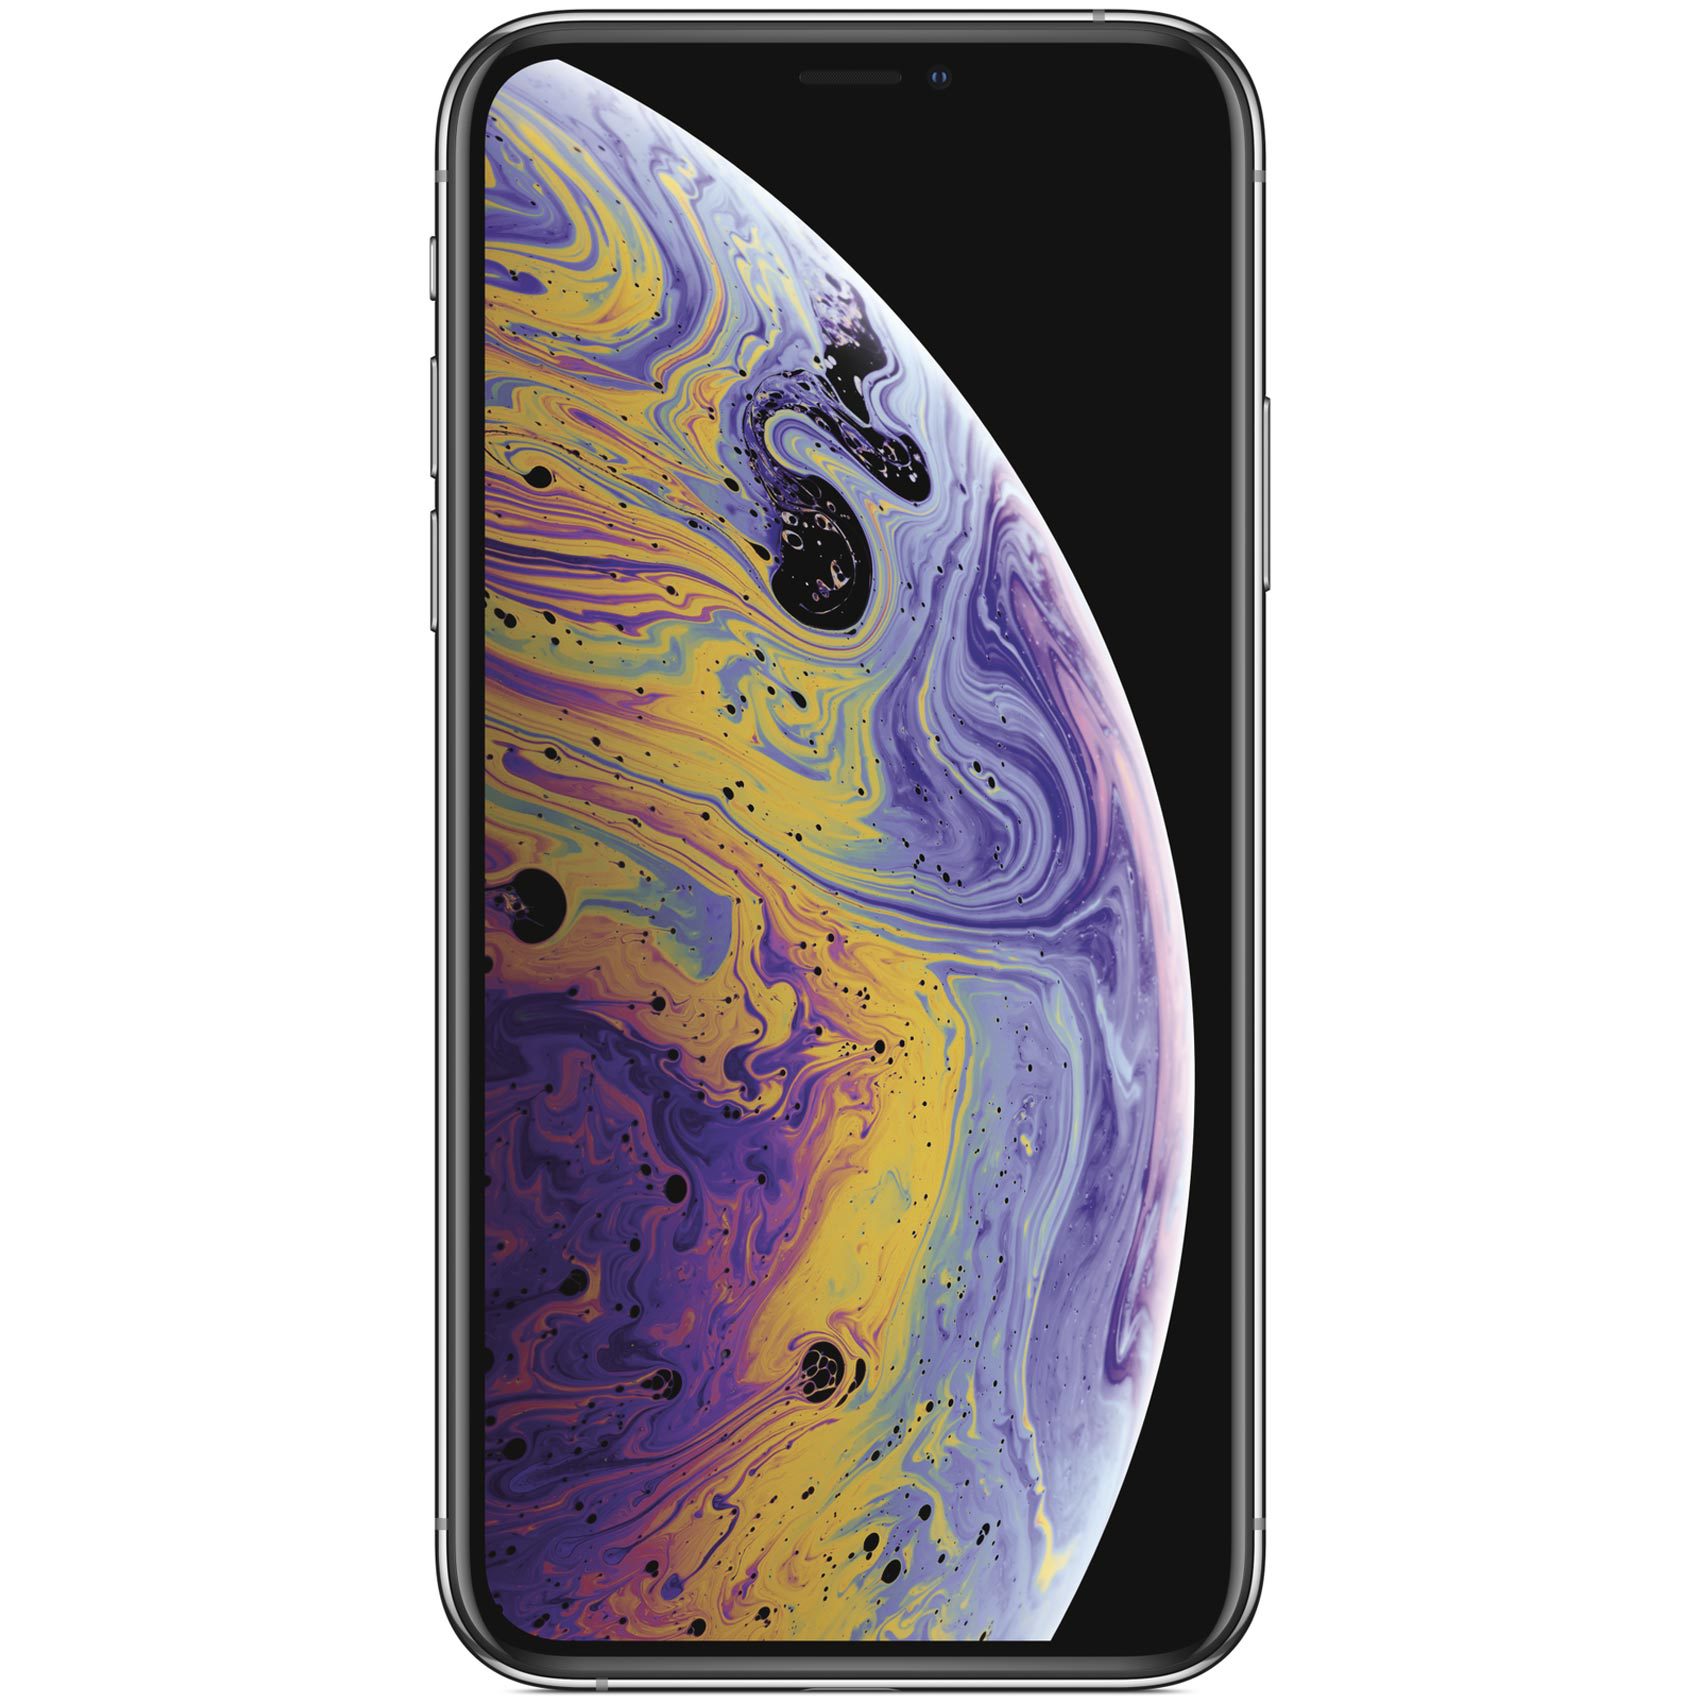 Buy Apple iPhone XS Max 256GB Silver Online - Shop null on Carrefour UAE